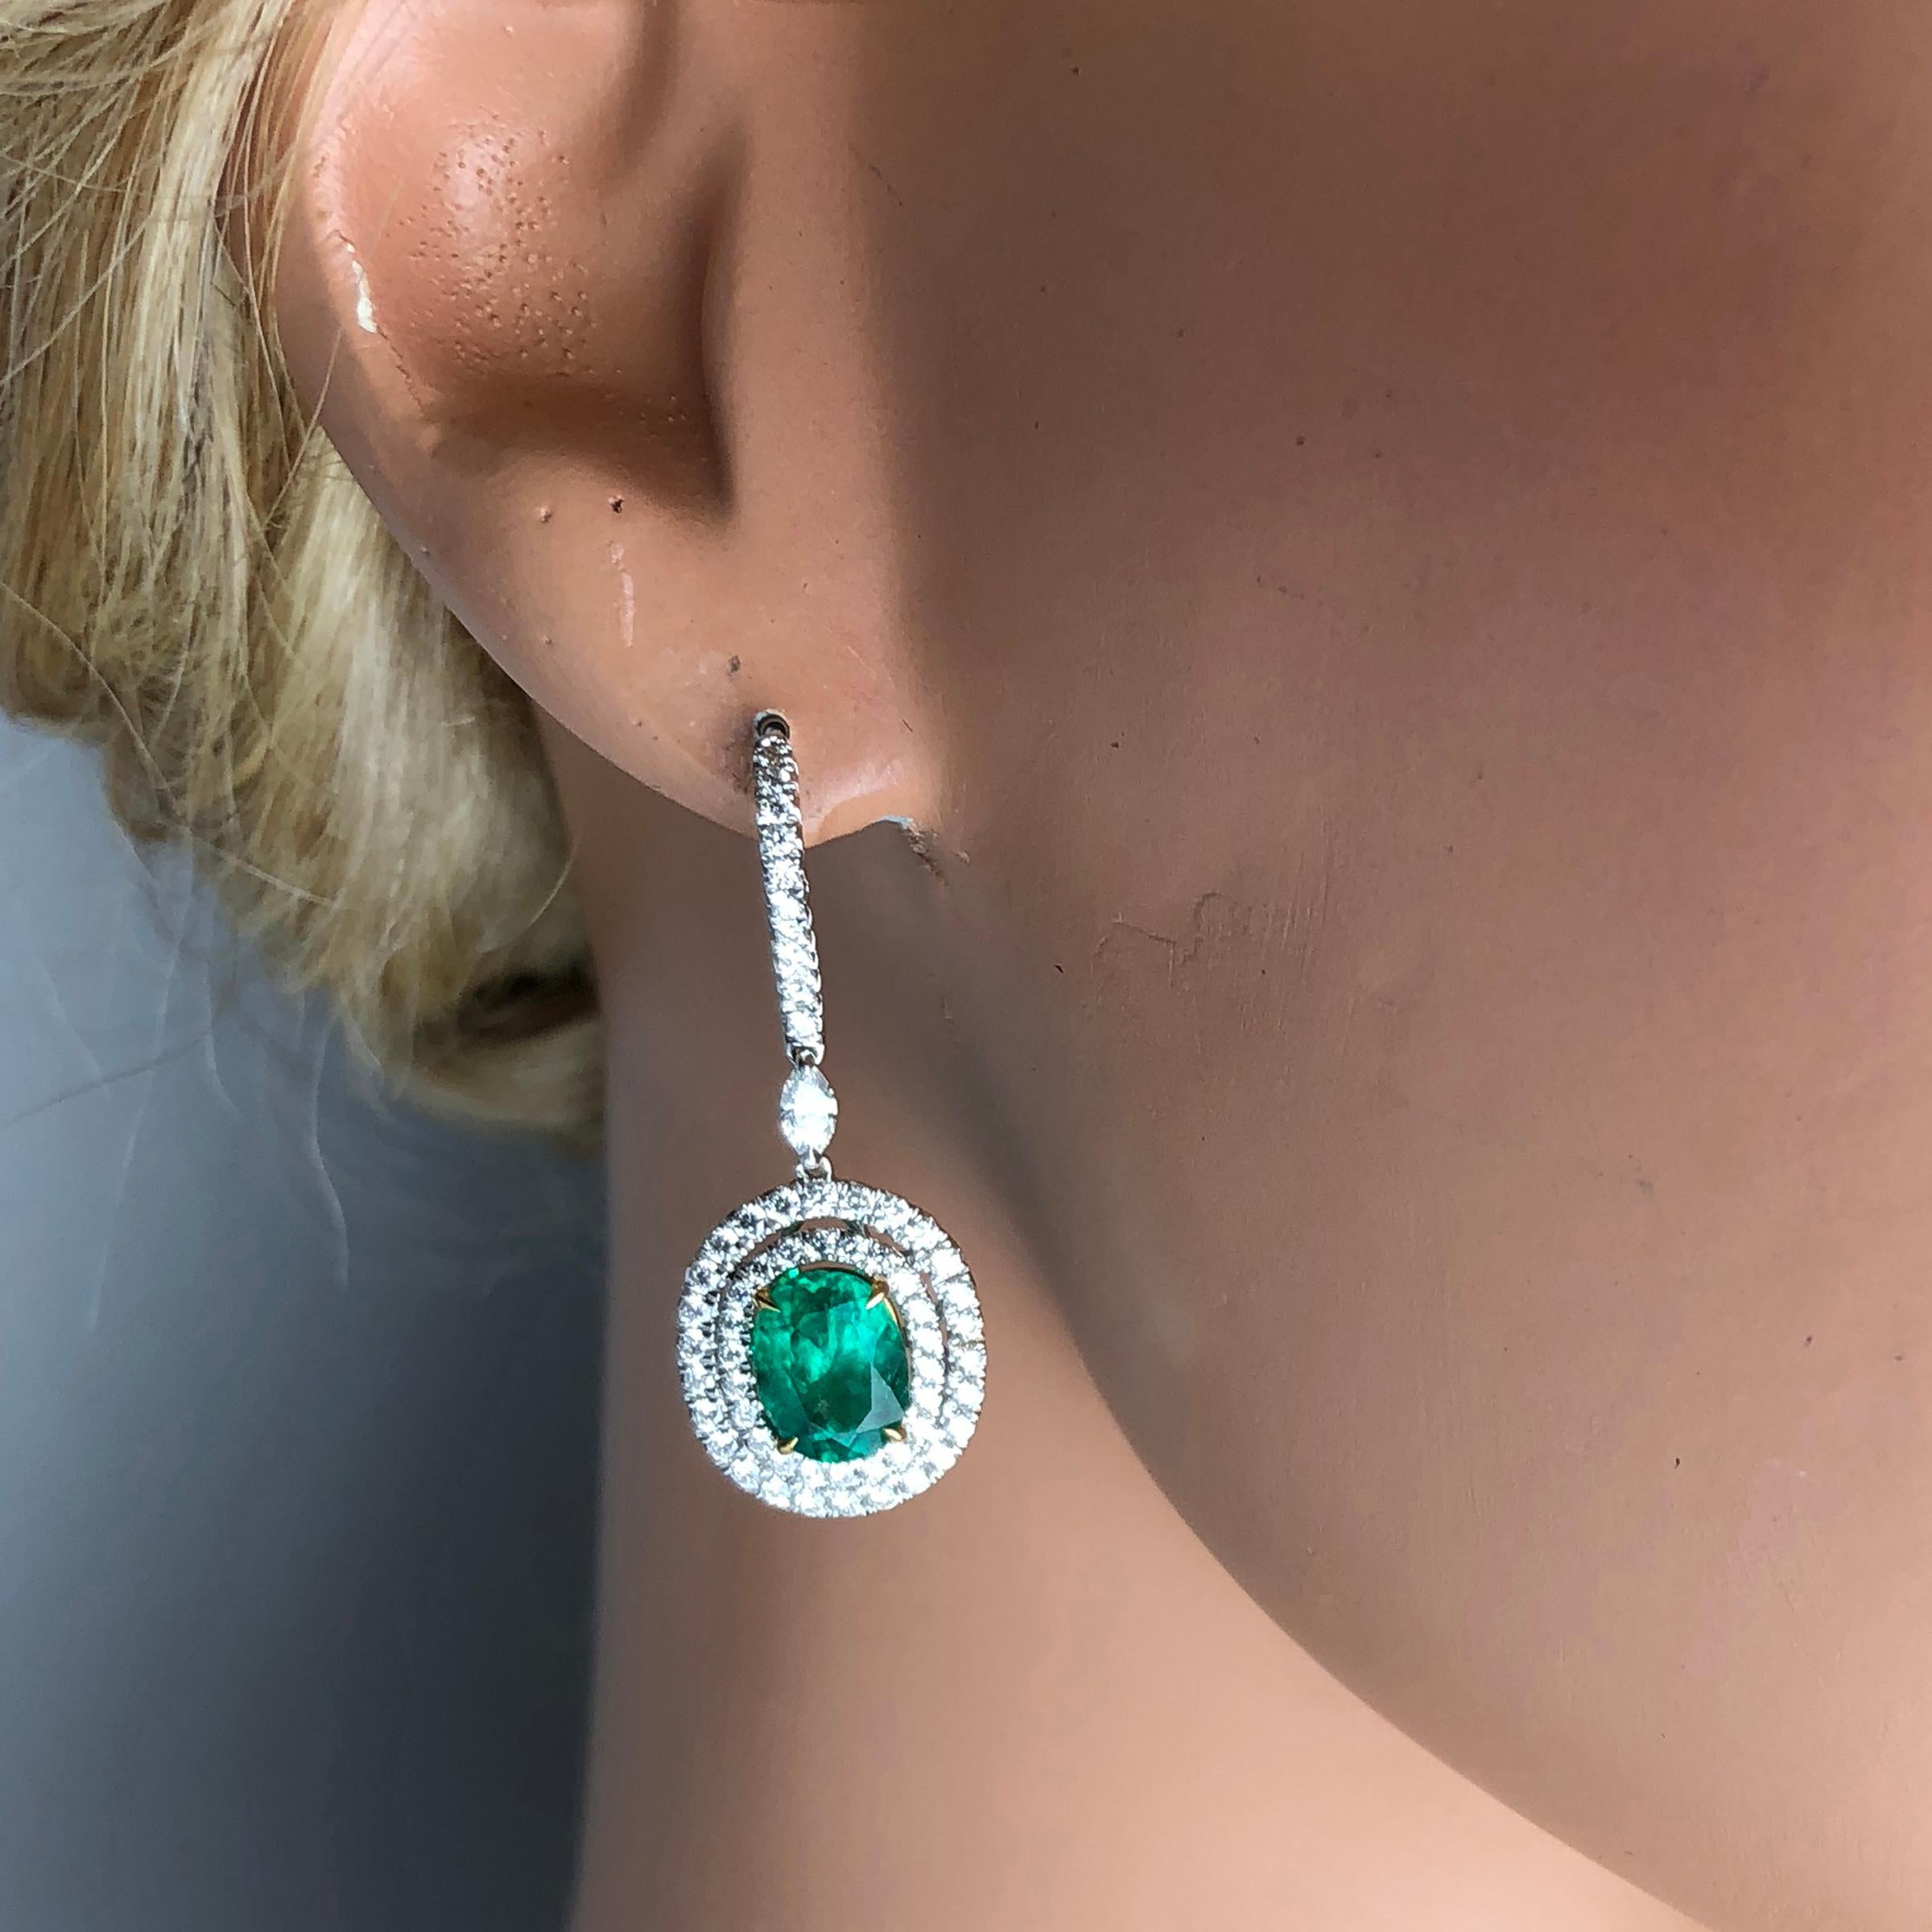 (DiamondTown) These beautiful drop dangle earrings feature 3.73 carats oval cut fine emerald, surrounded by double halos of round white diamonds. A single marquise cut diamond links the body of the earring to a lever-back hook, also featuring round